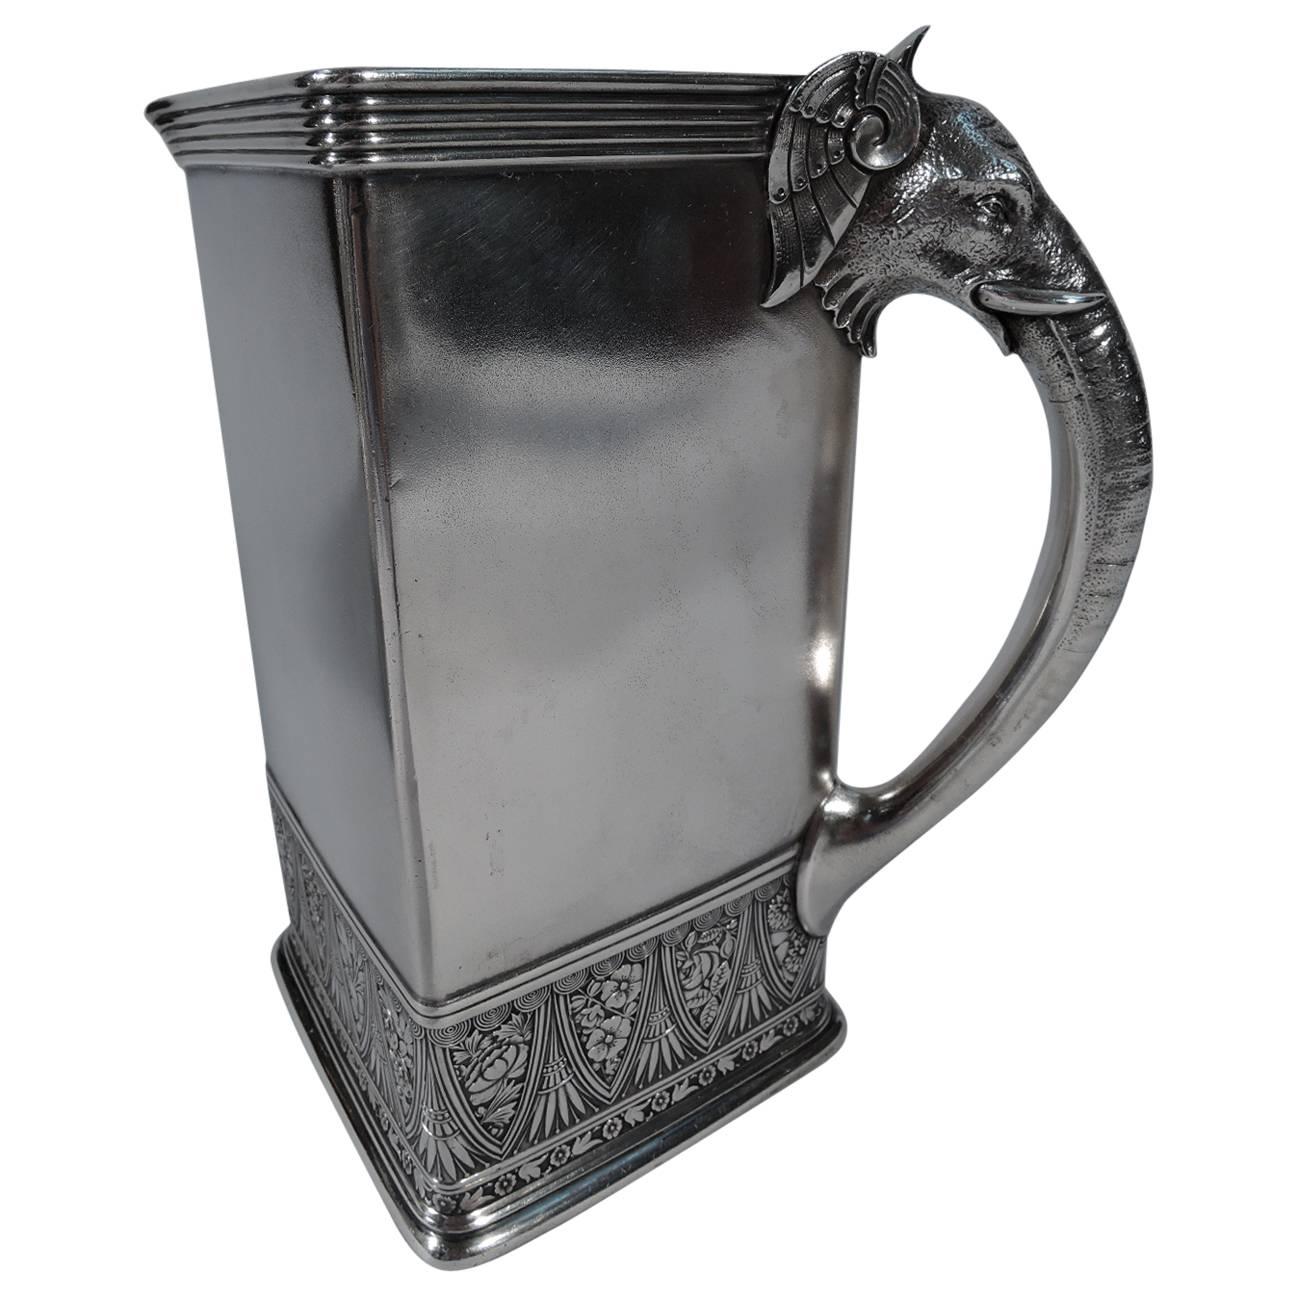 Rare Gorham Aesthetic Sterling Silver Pitcher with Elephant Handle